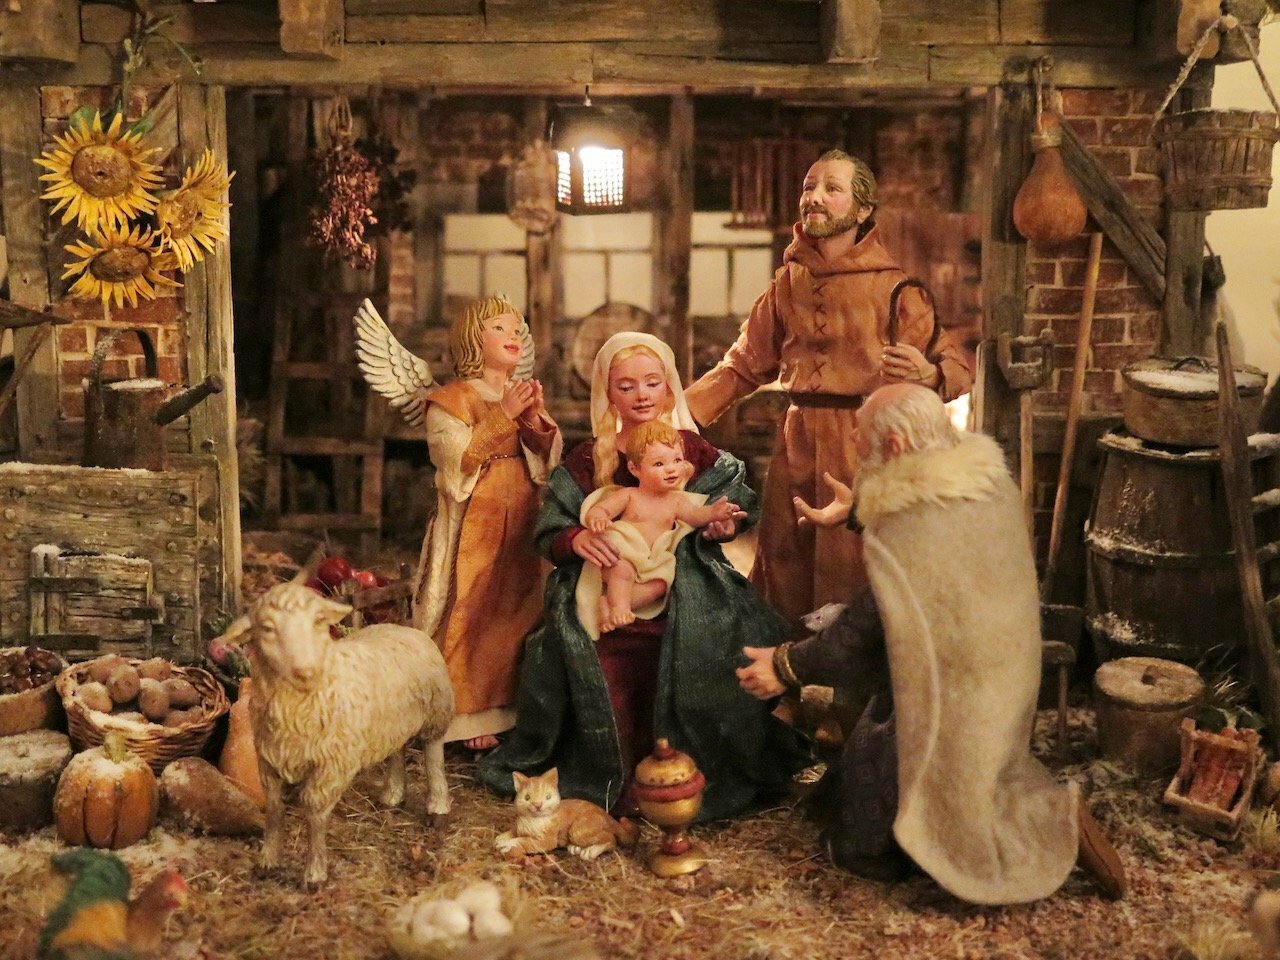 This Flemish Nativity scene, created by New Jersey artists R. Michael Palan and Karen Loccisano, reflects the style of the Flemish artist Pieter Bruegel from the 16th century.